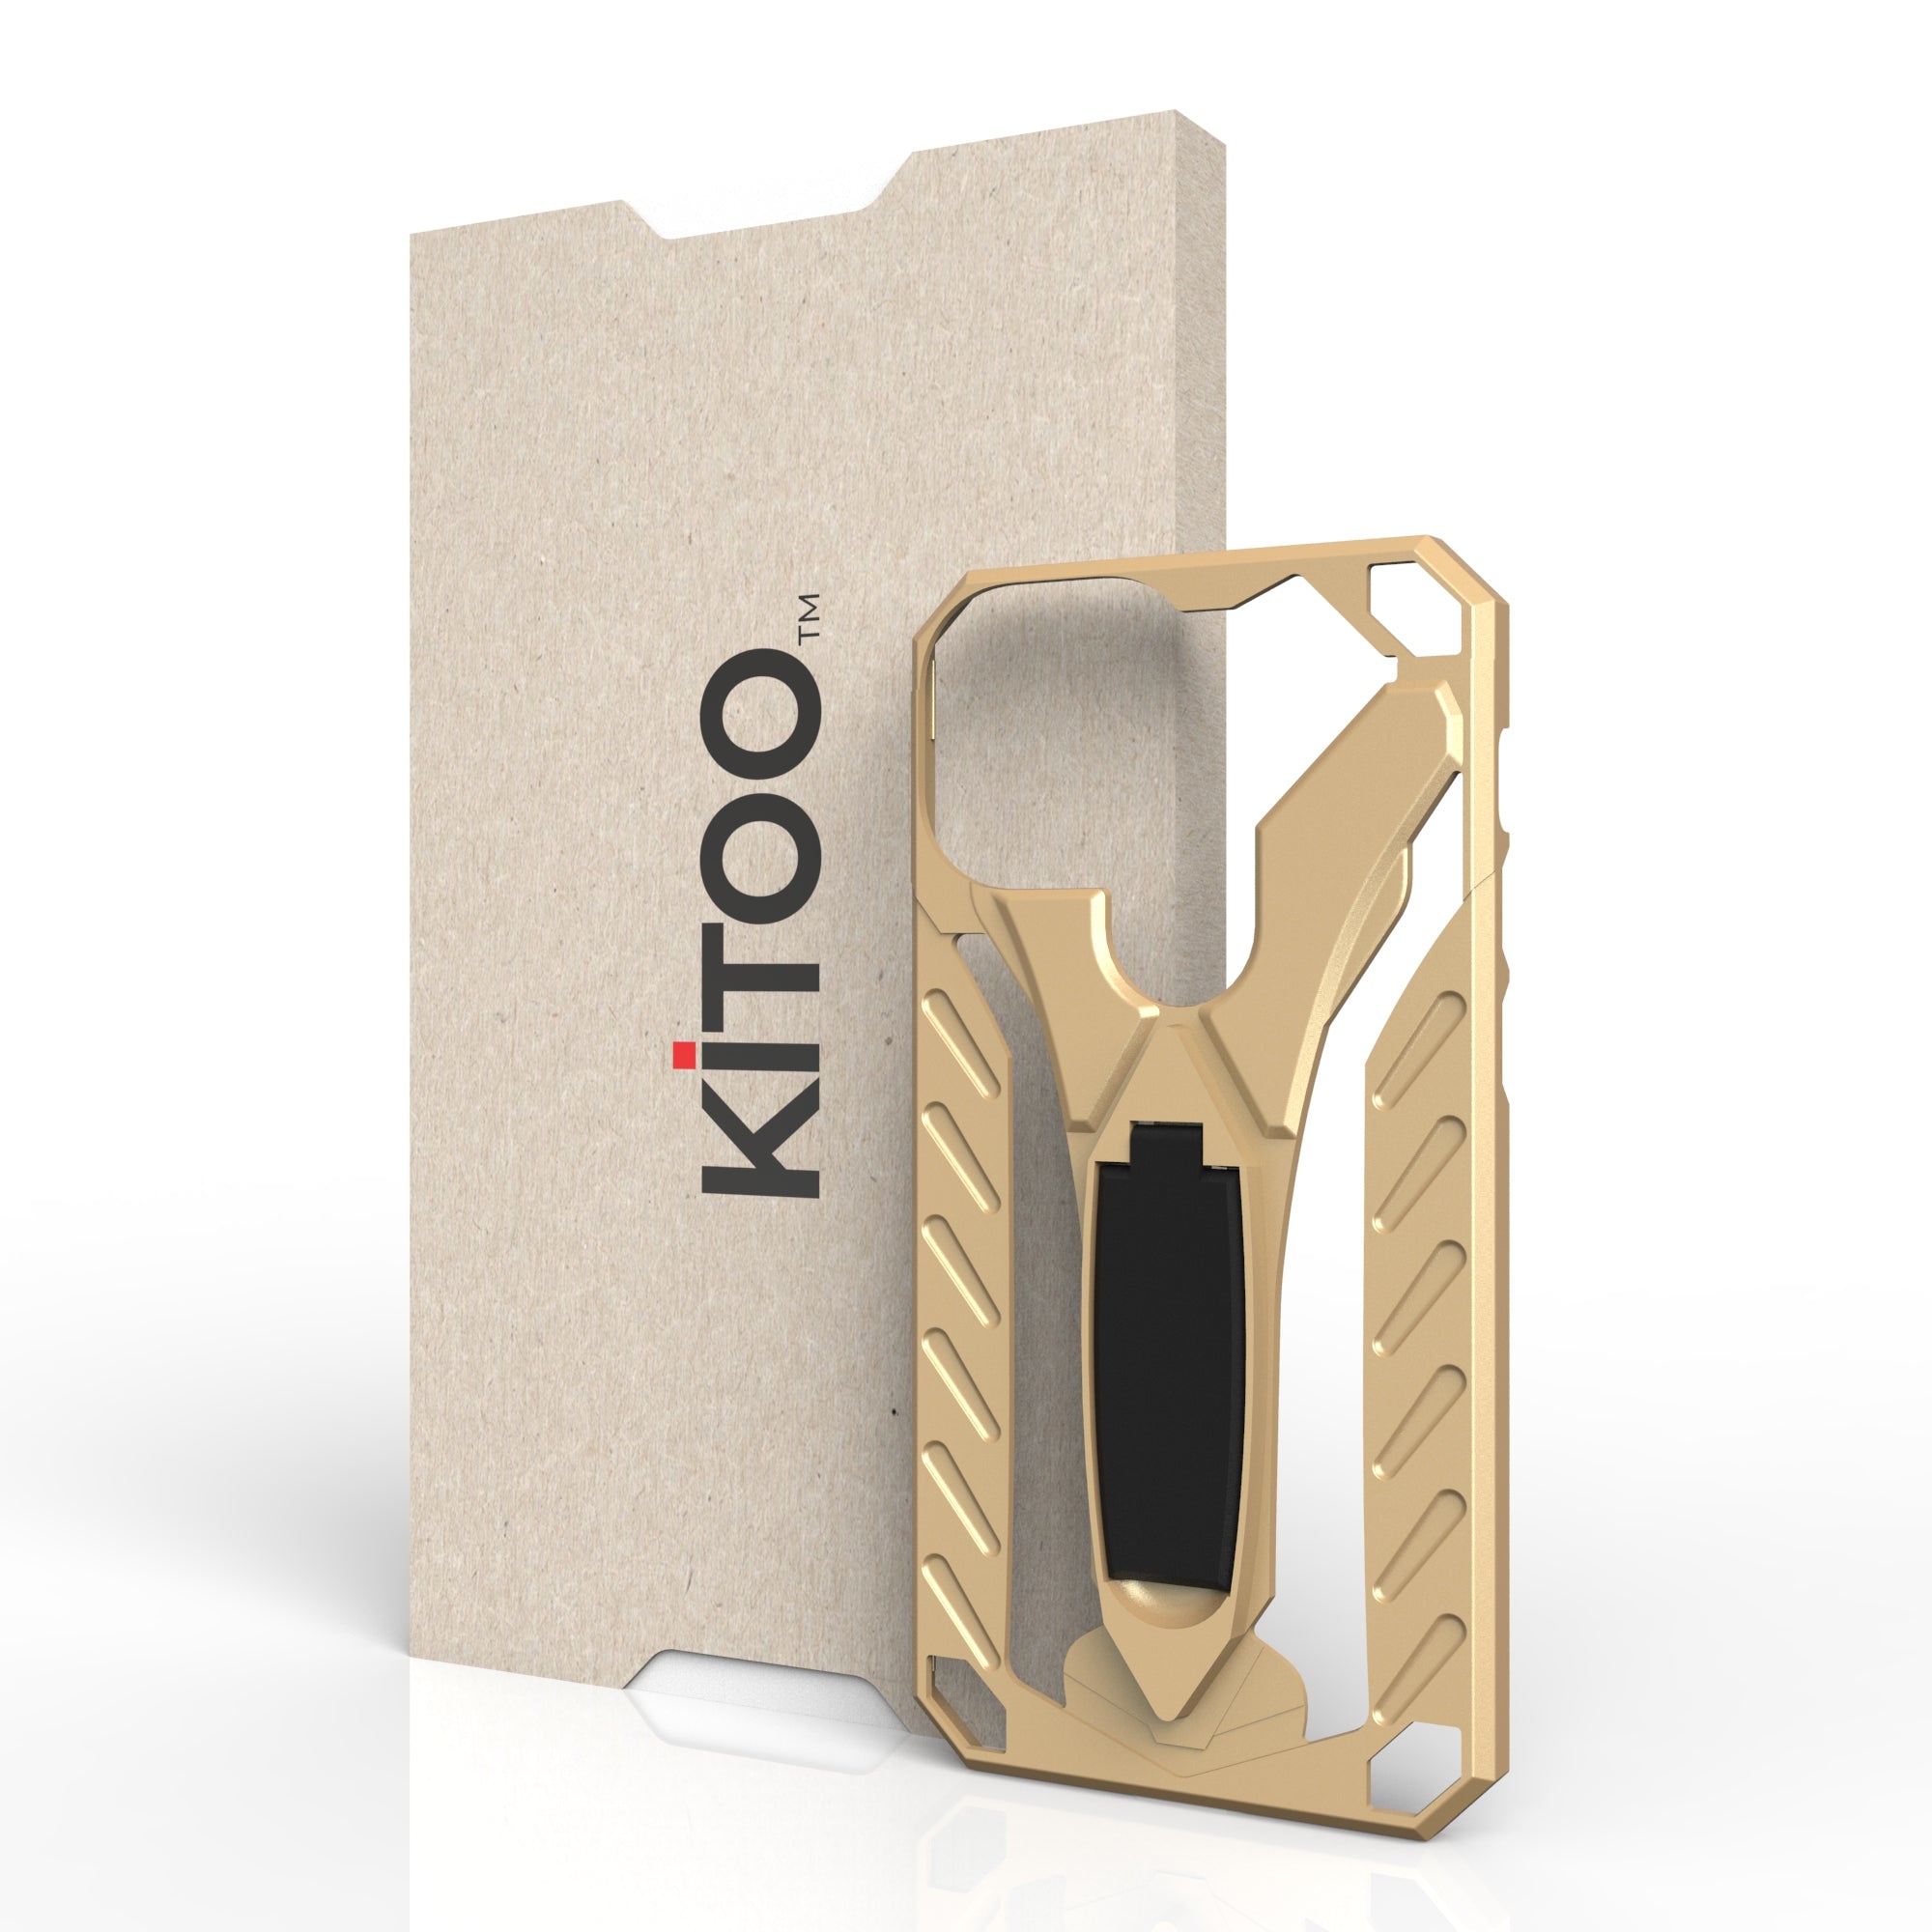 Kitoo Kickstand Panel Designed for iPhone 13 Mini case (Spare Part only) - Golden